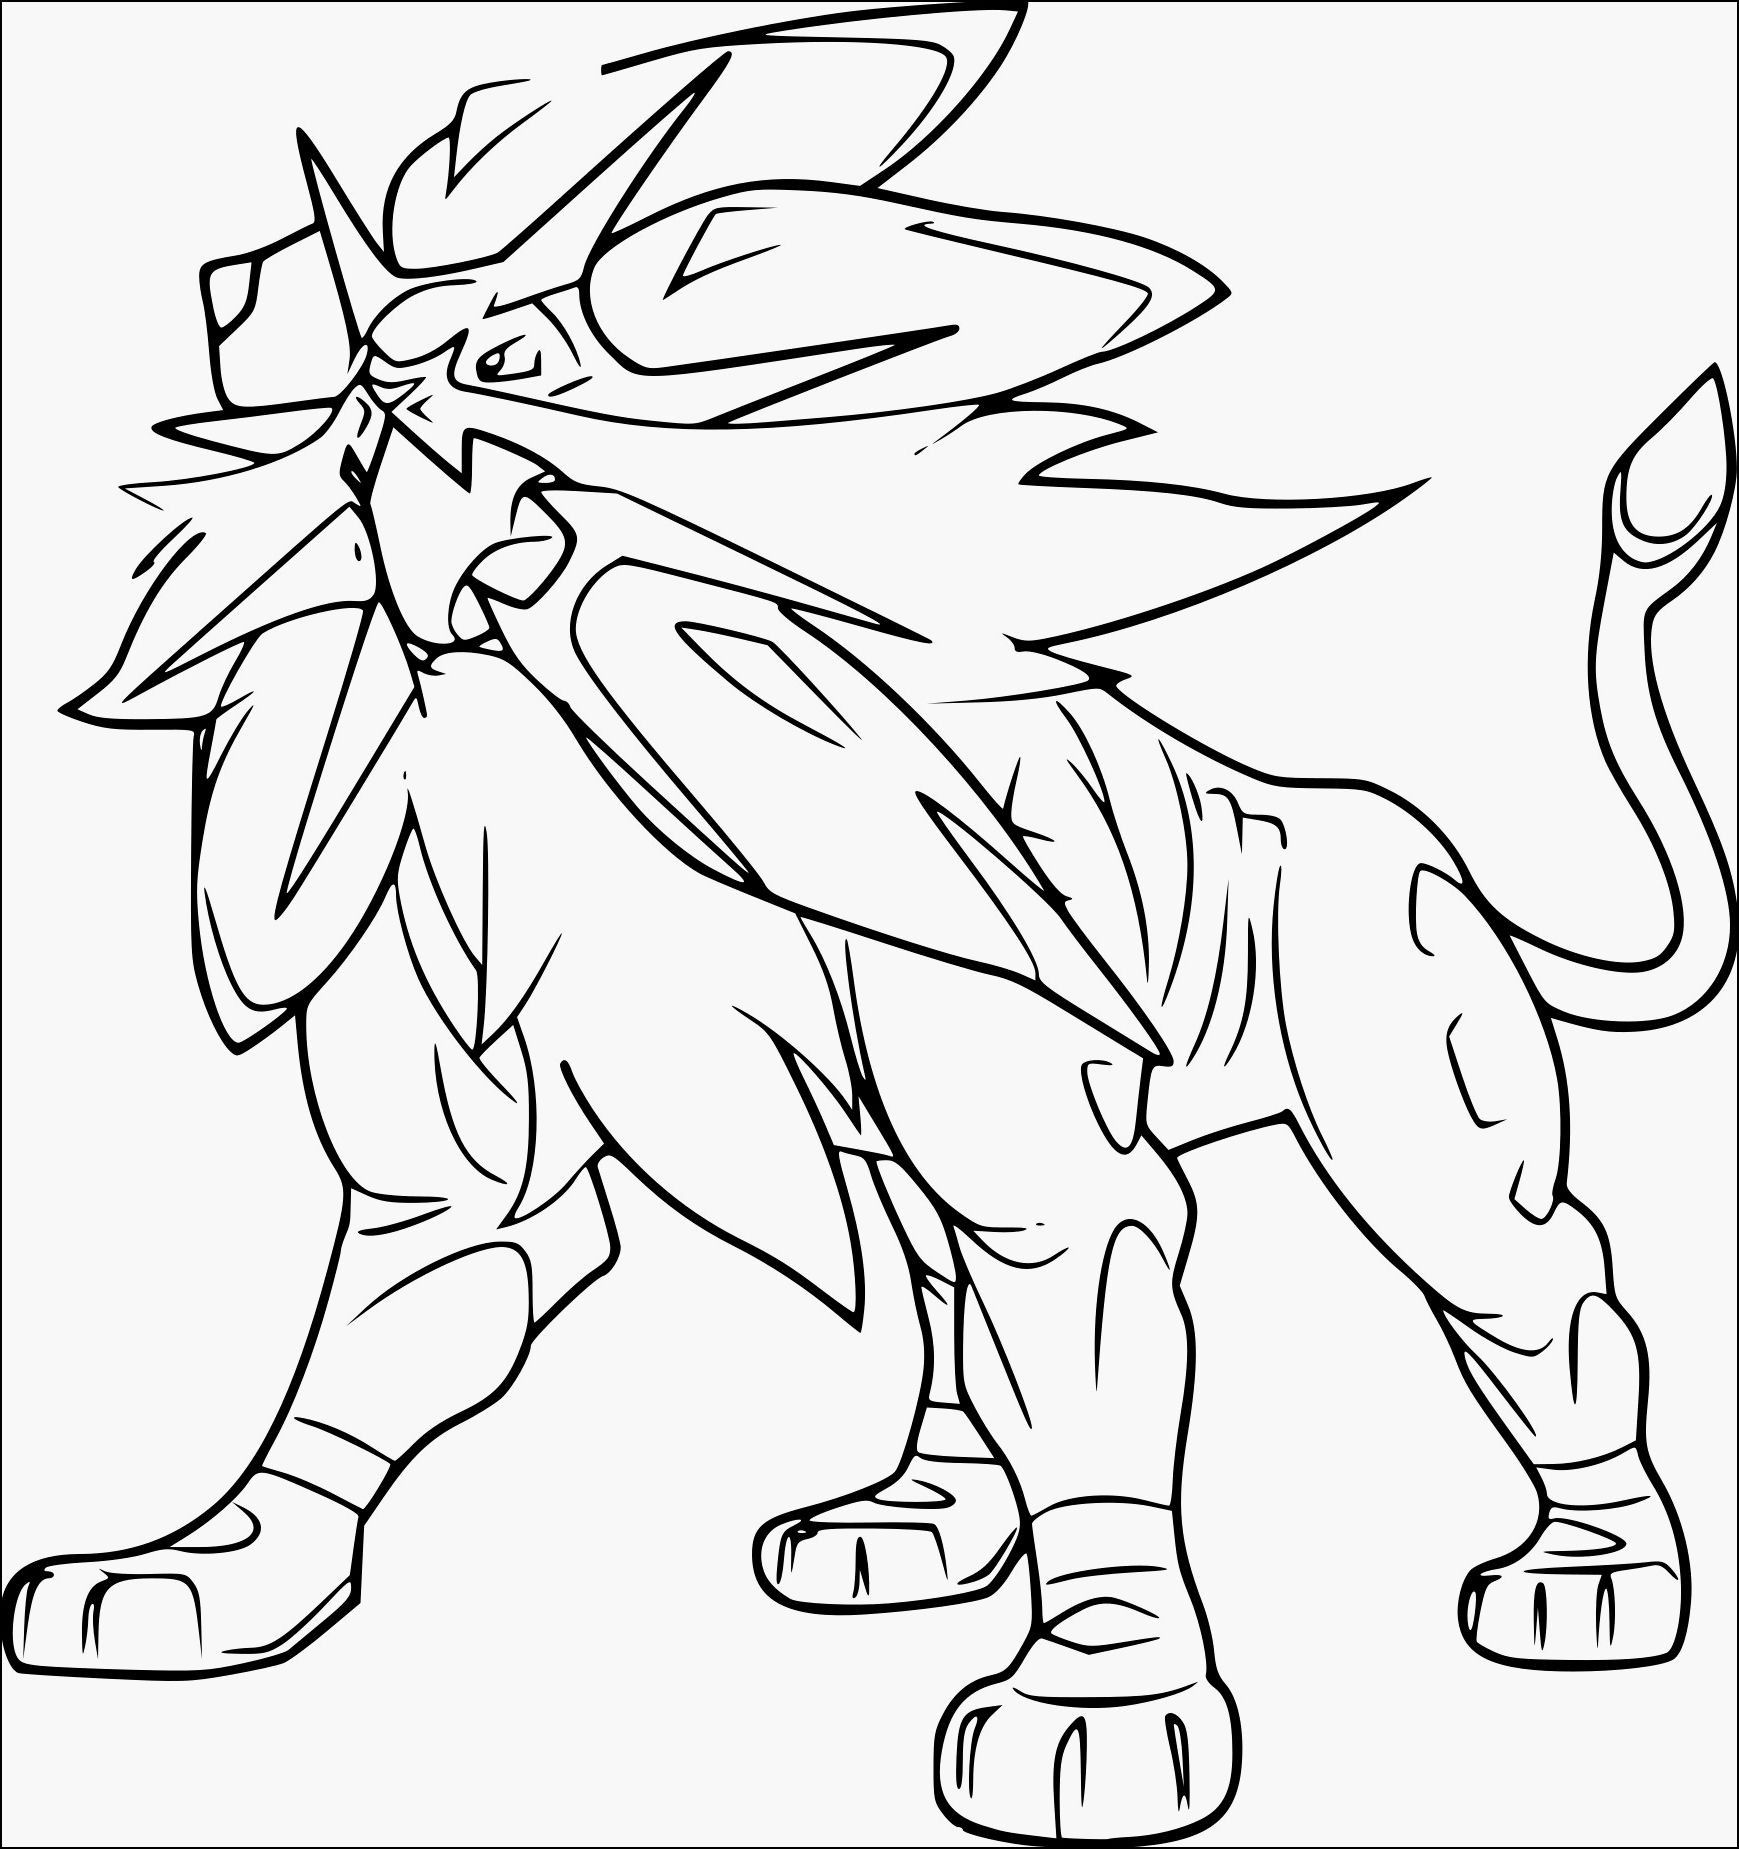 Zygarde Coloring Page All Free in 2021 | Pokemon coloring pages, Pokemon  coloring, Pokemon coloring sheets